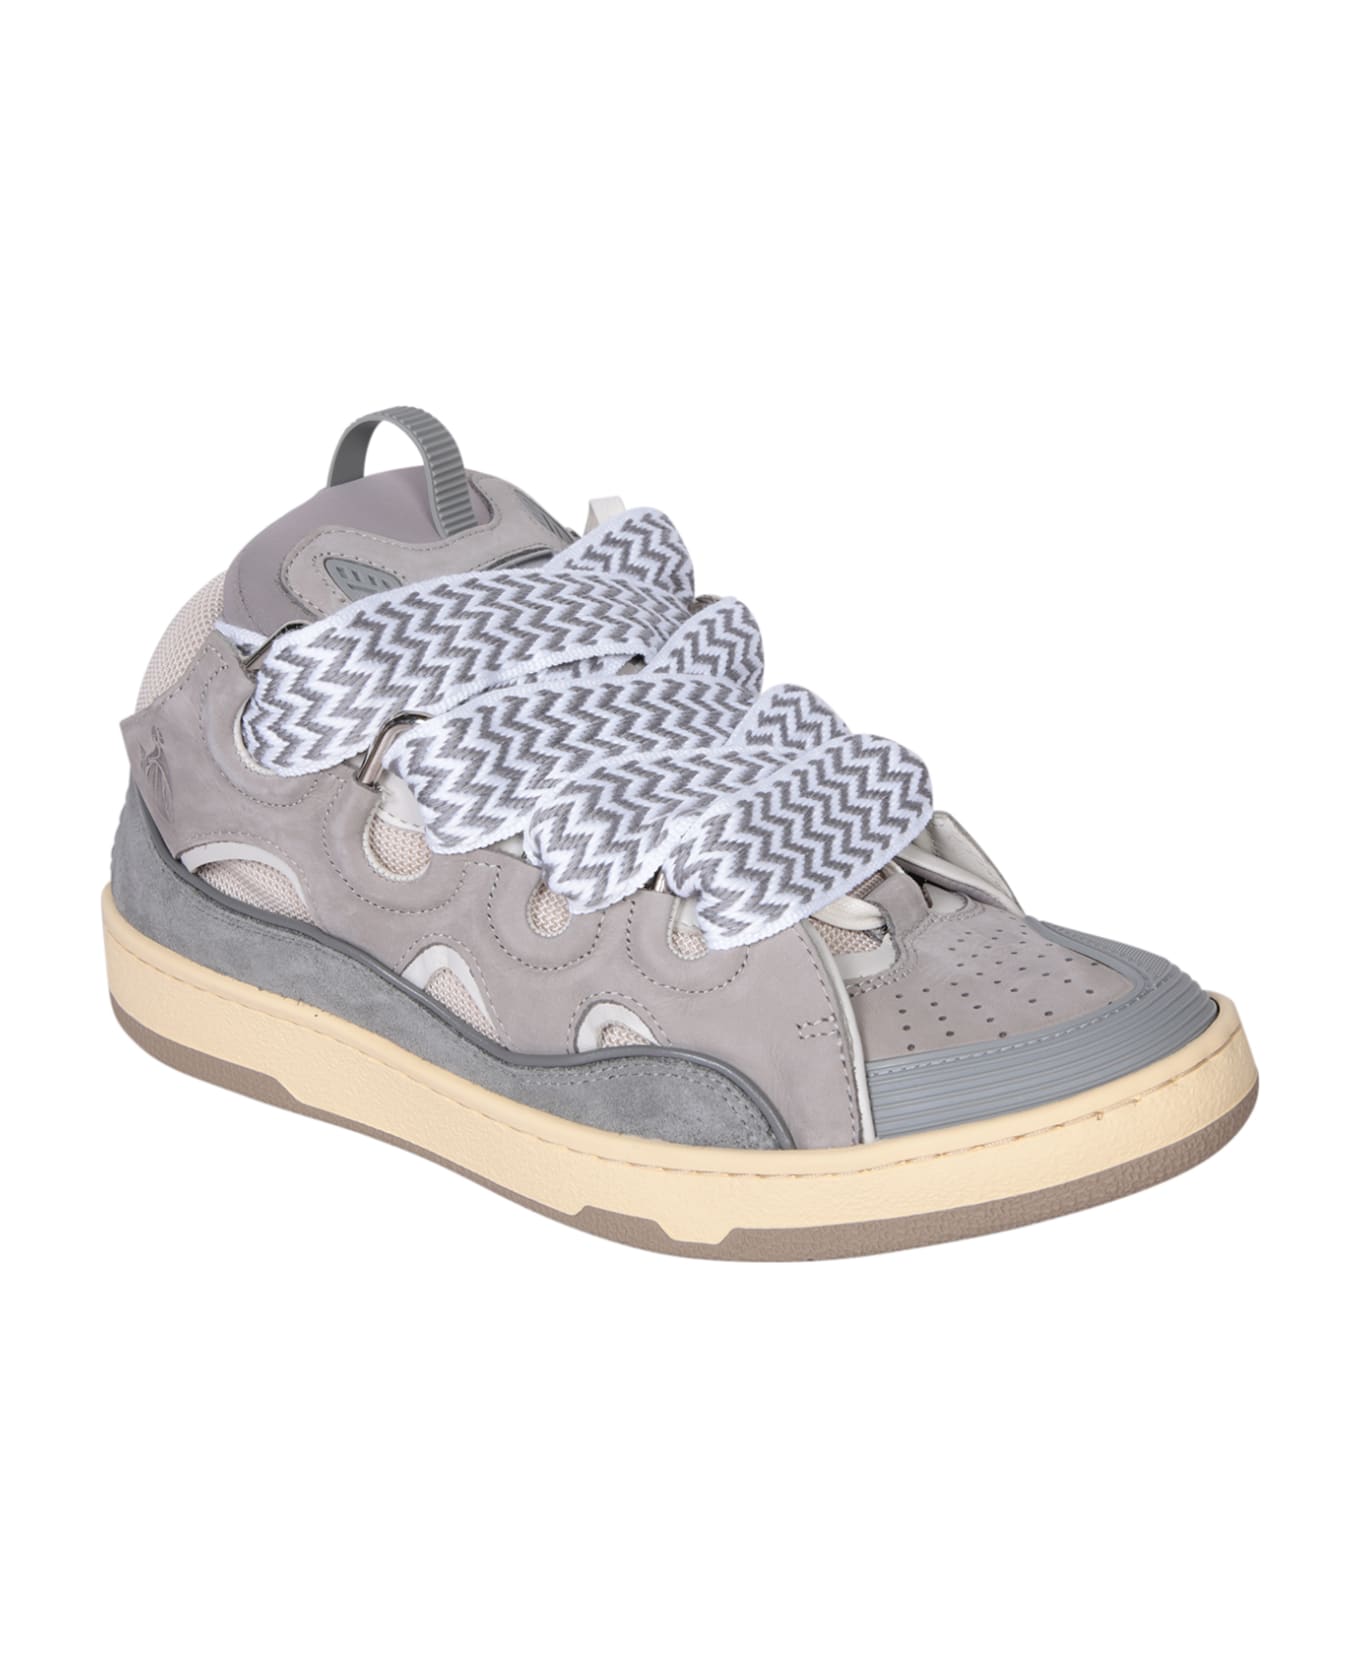 Lanvin Thick Lace Sneakers - Grey 2